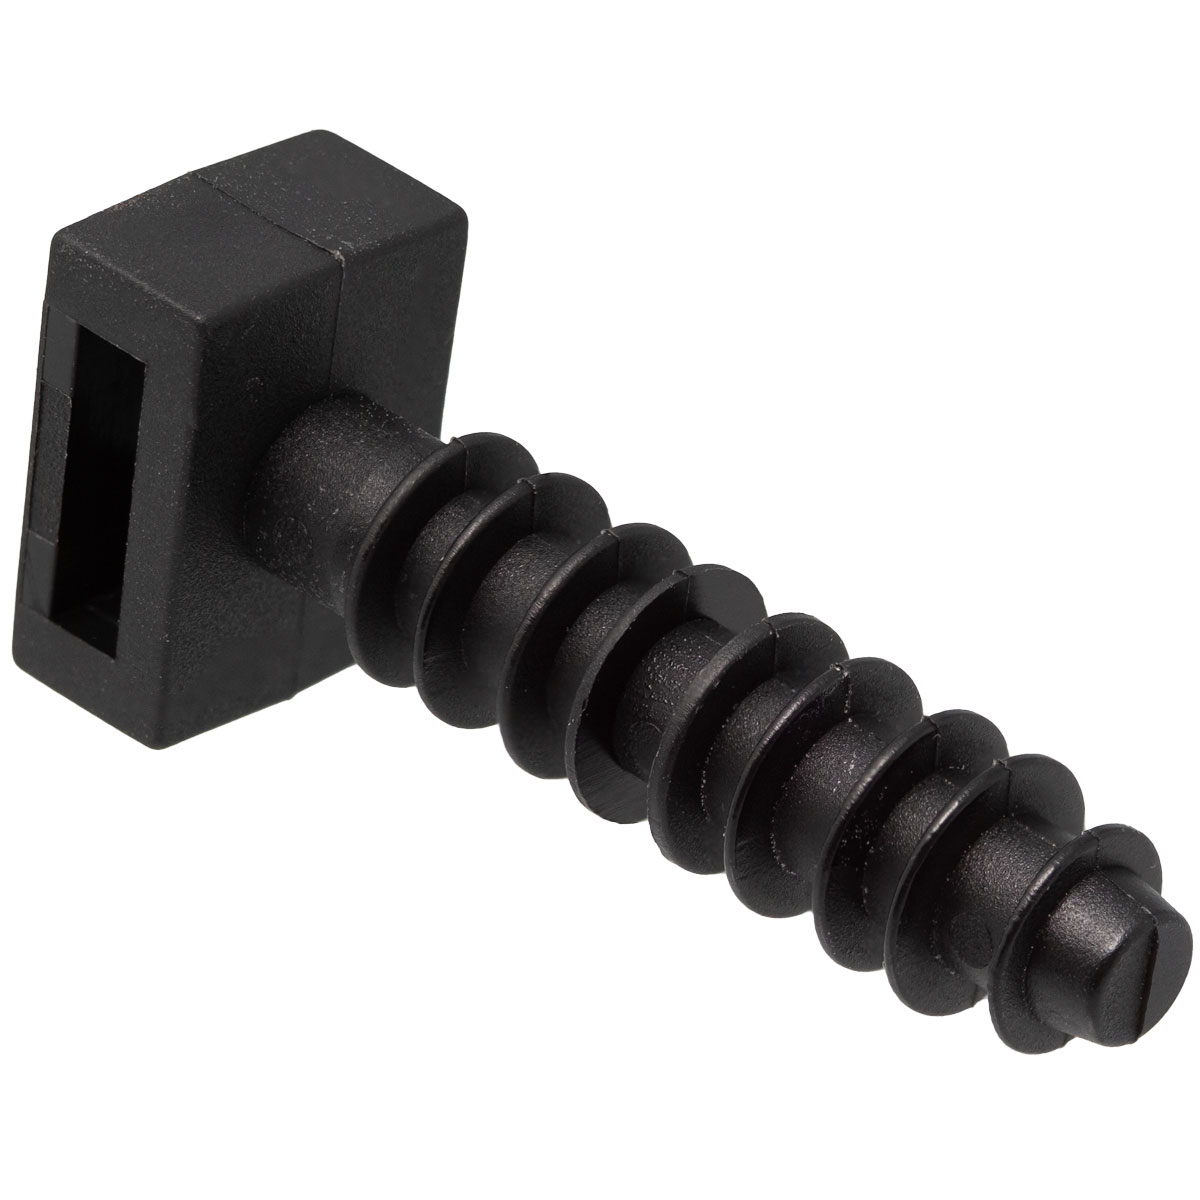 Wall plug for cable ties, 9.8x 43.6 mm, Black